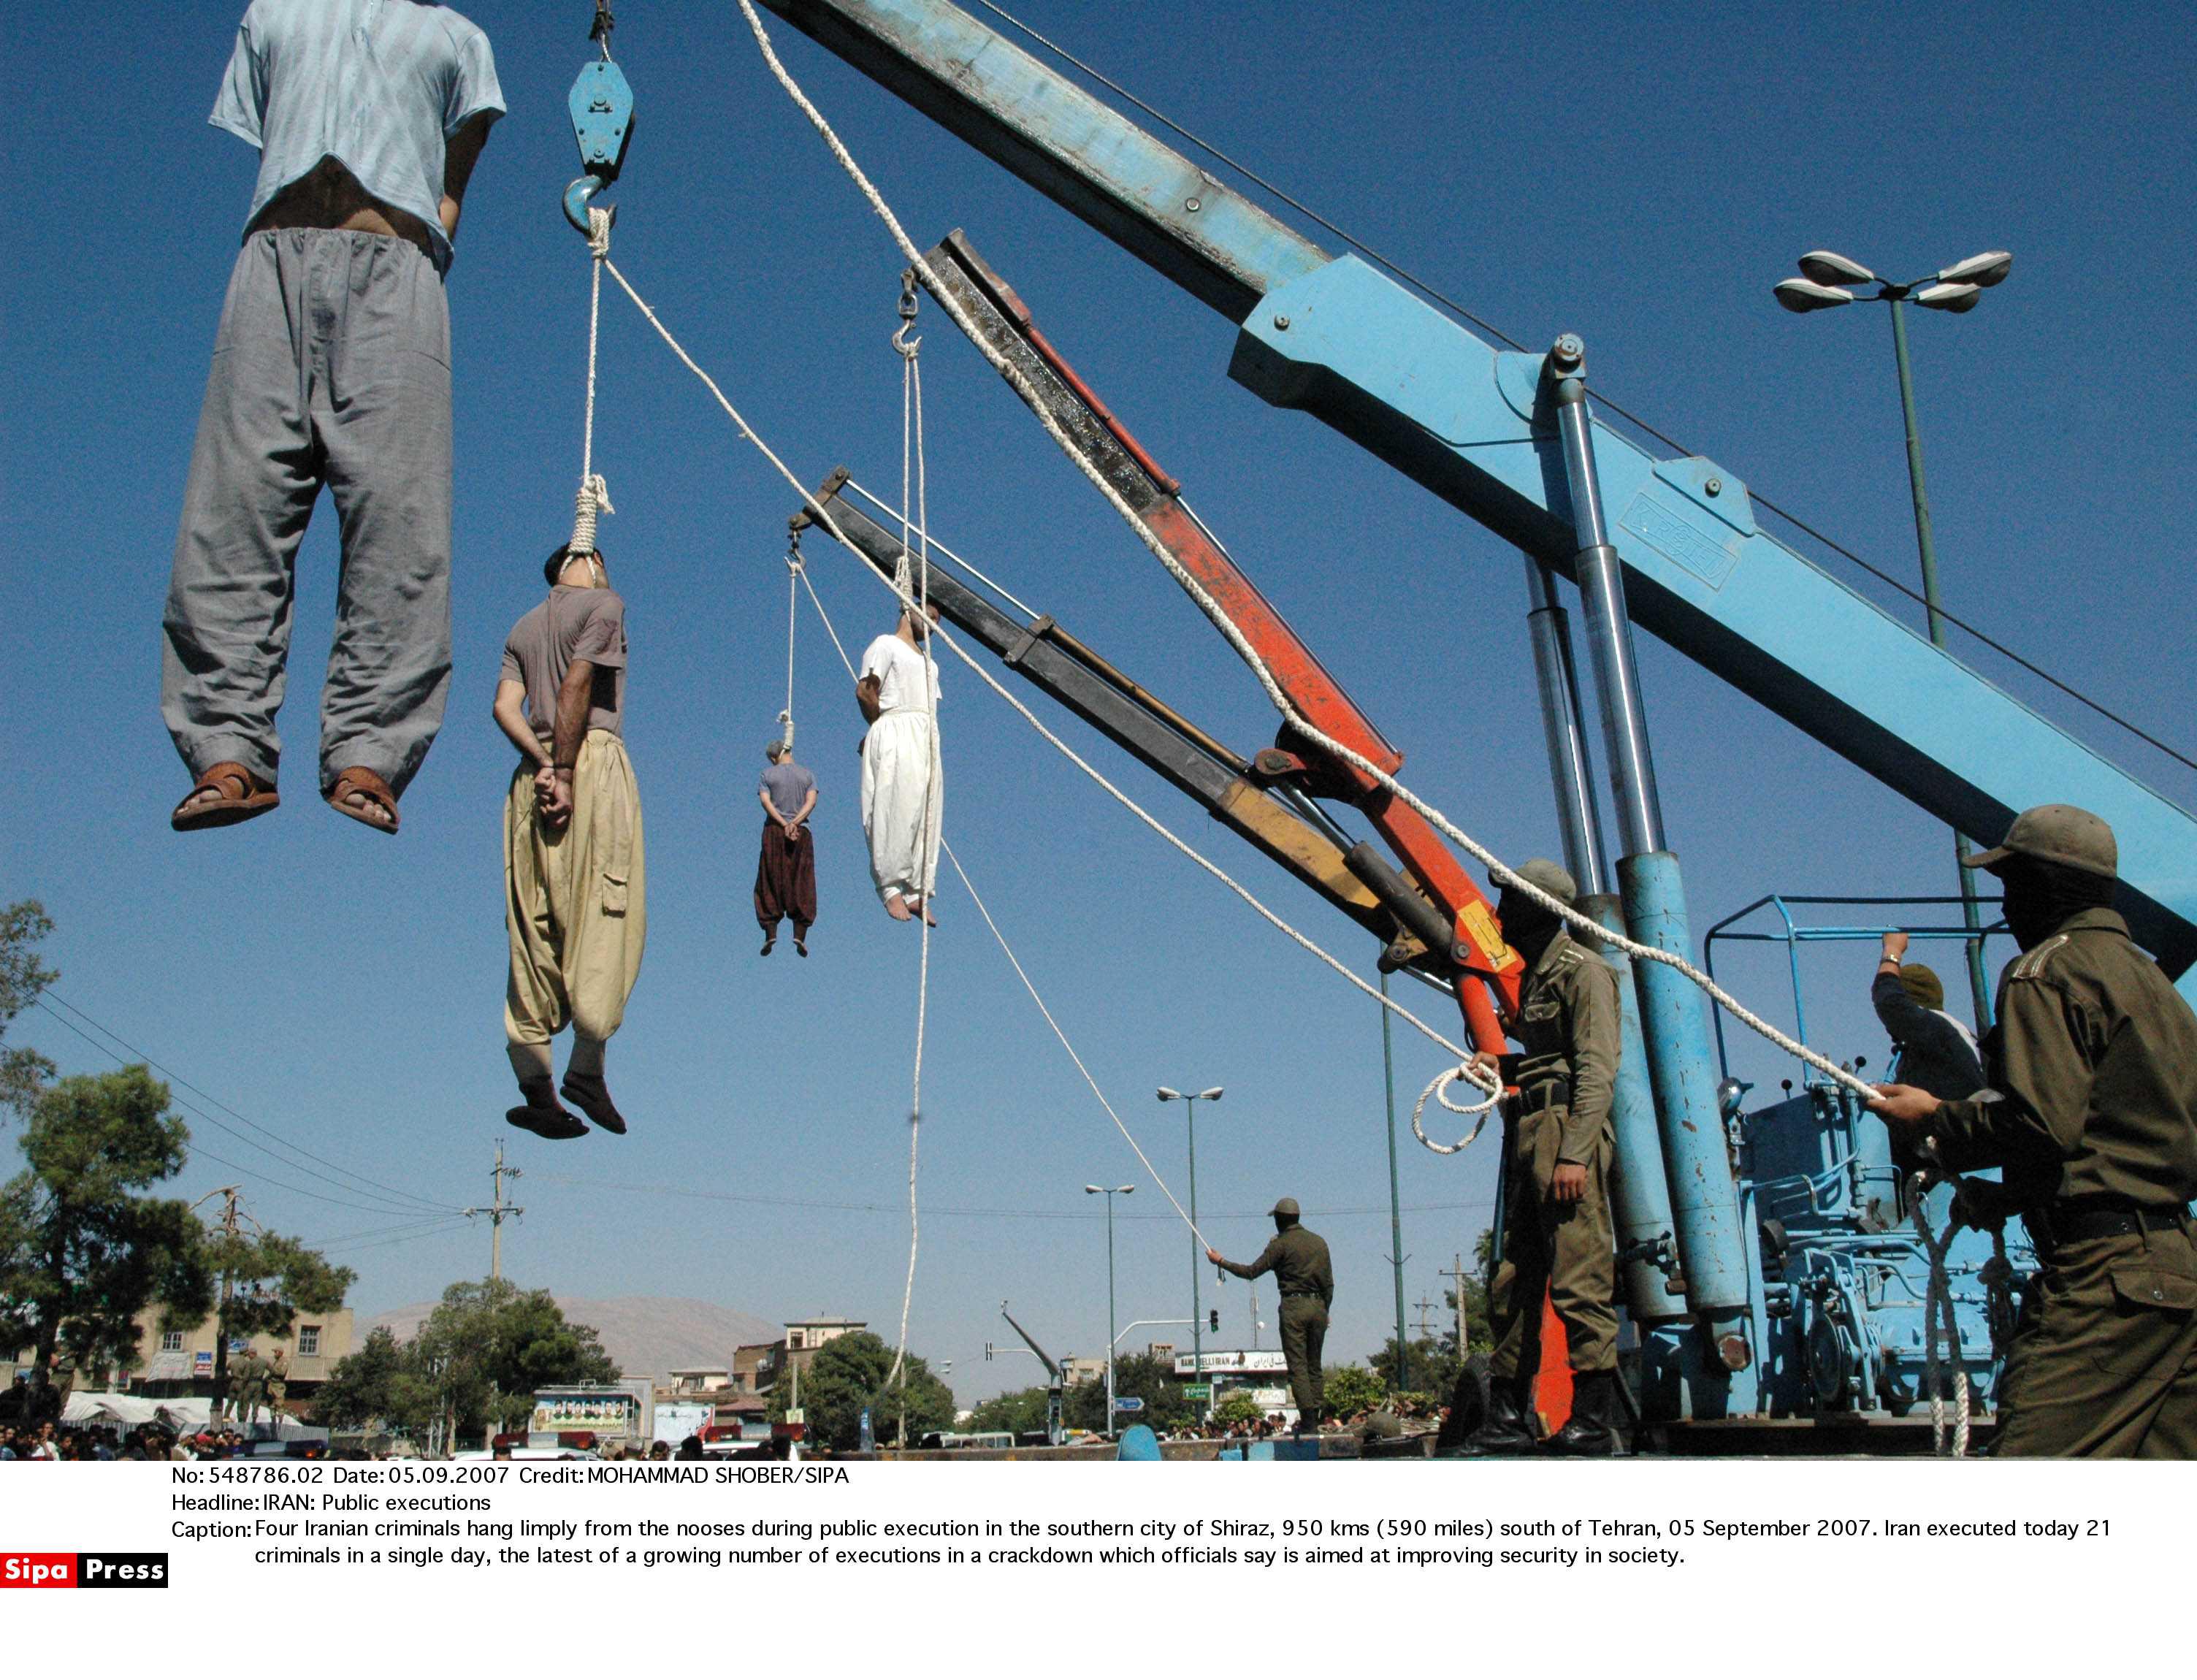 Four Iranian criminals hang limply from the nooses during public execution in the southern city of Shiraz, 950 kms (590 miles) south of Tehran, 05 September 2007. Iran executed today 21 criminals in a single day, the latest of a growing number of executions in a crackdown which officials say is aimed at improving security in society.